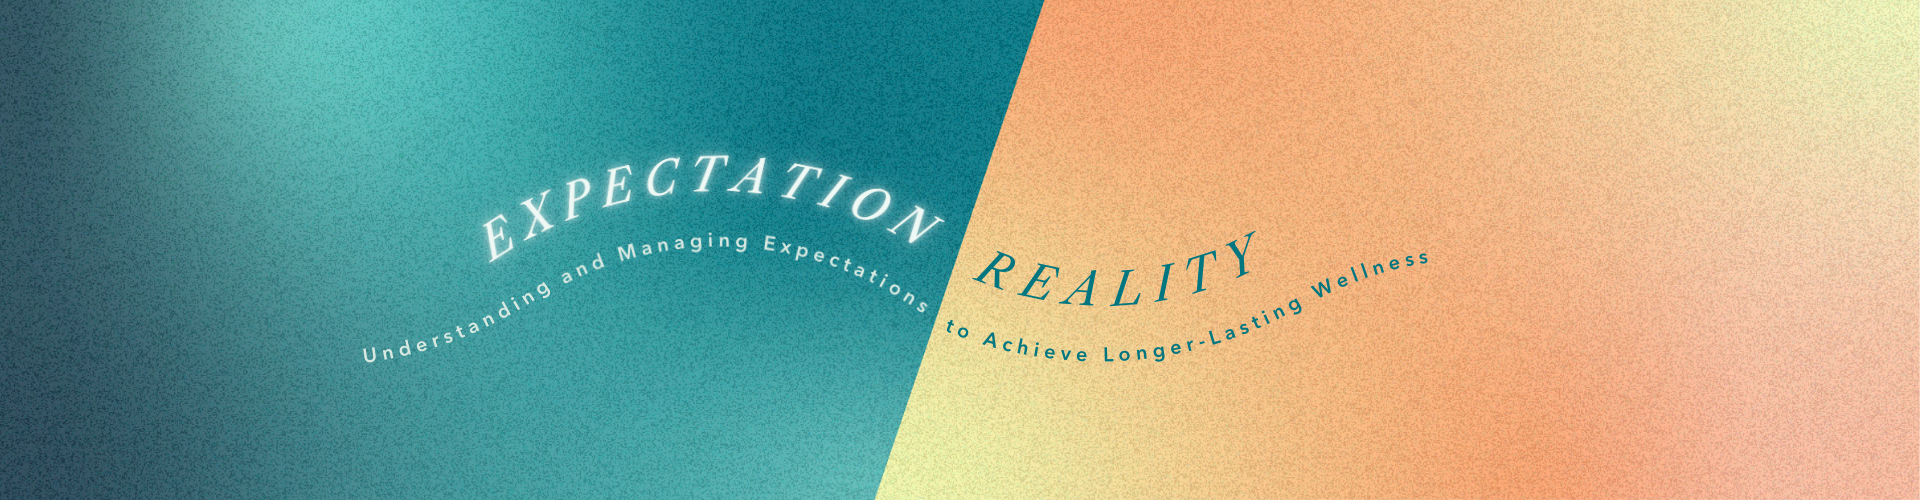 expectations vs reality banner